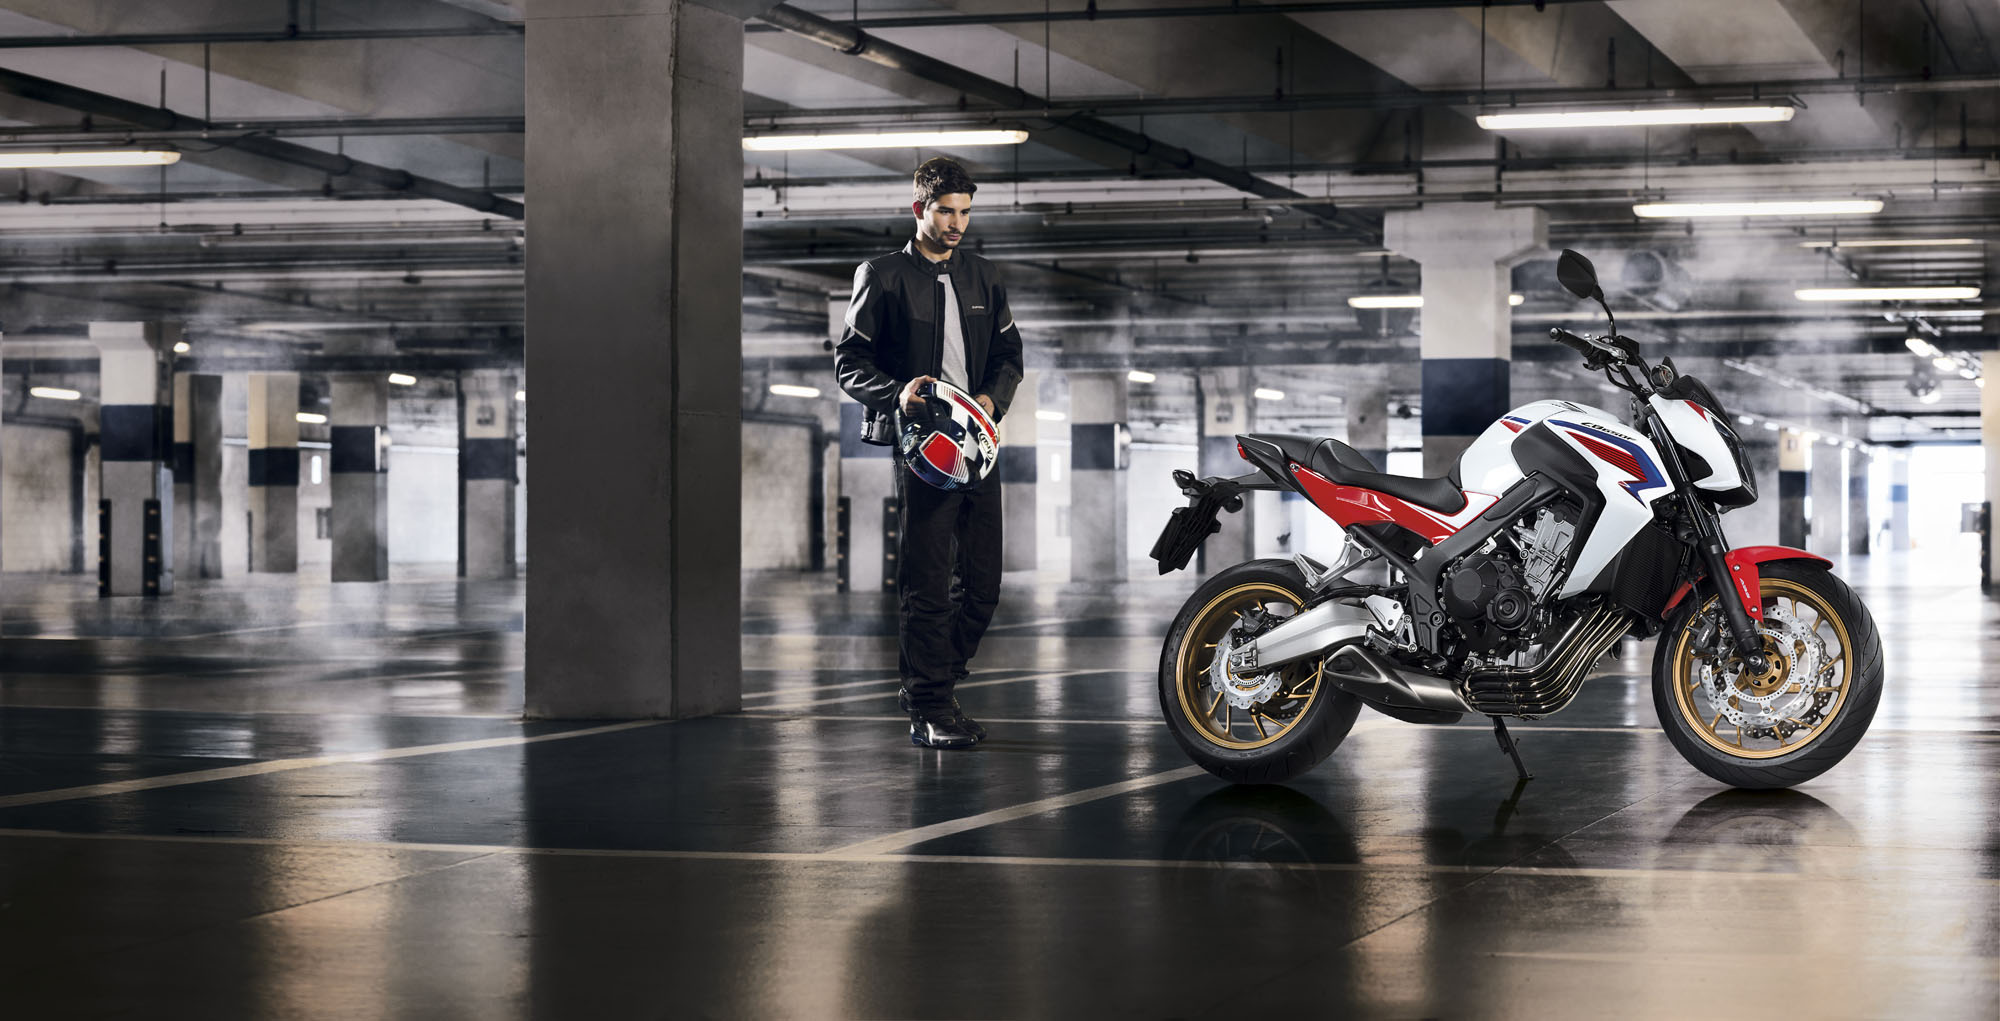 Two new Honda 650s unveiled